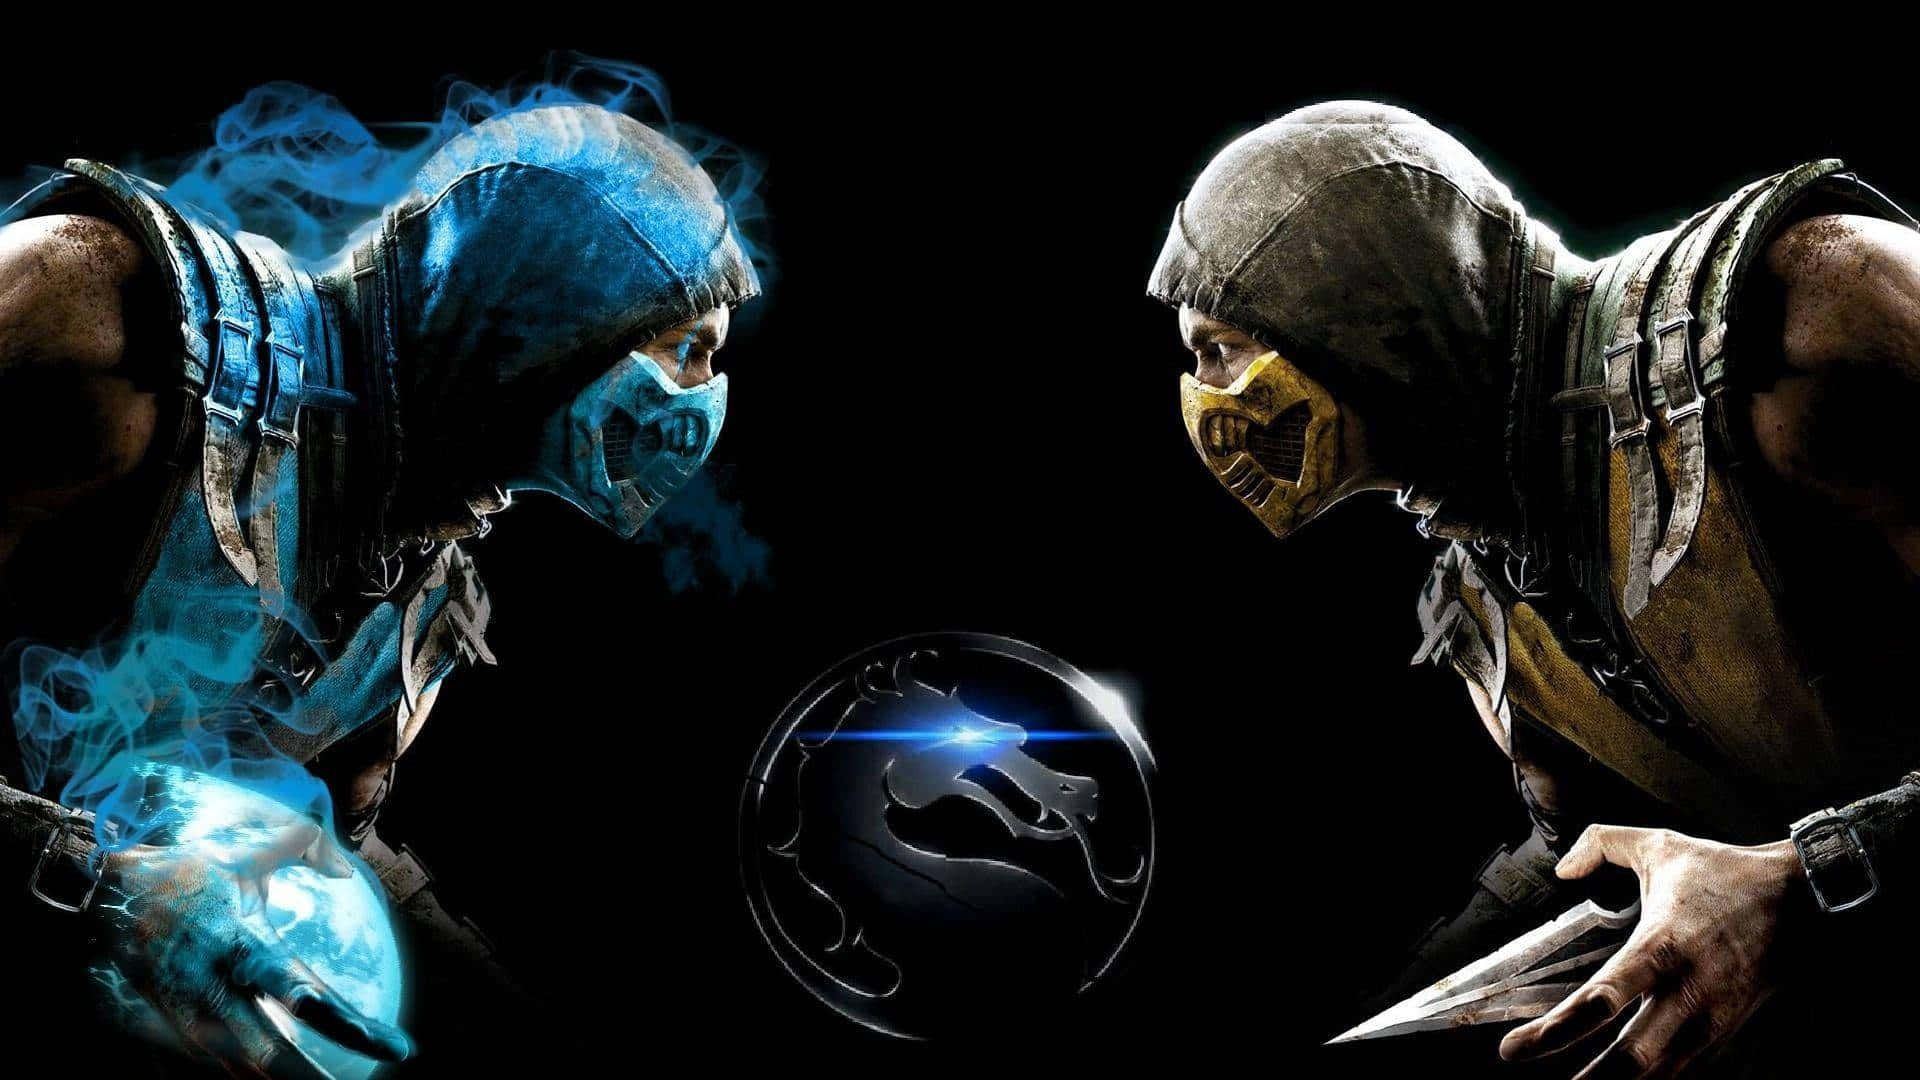 "Face off with Scorpion, the fire-breathing revenant of Mortal Kombat!" Wallpaper